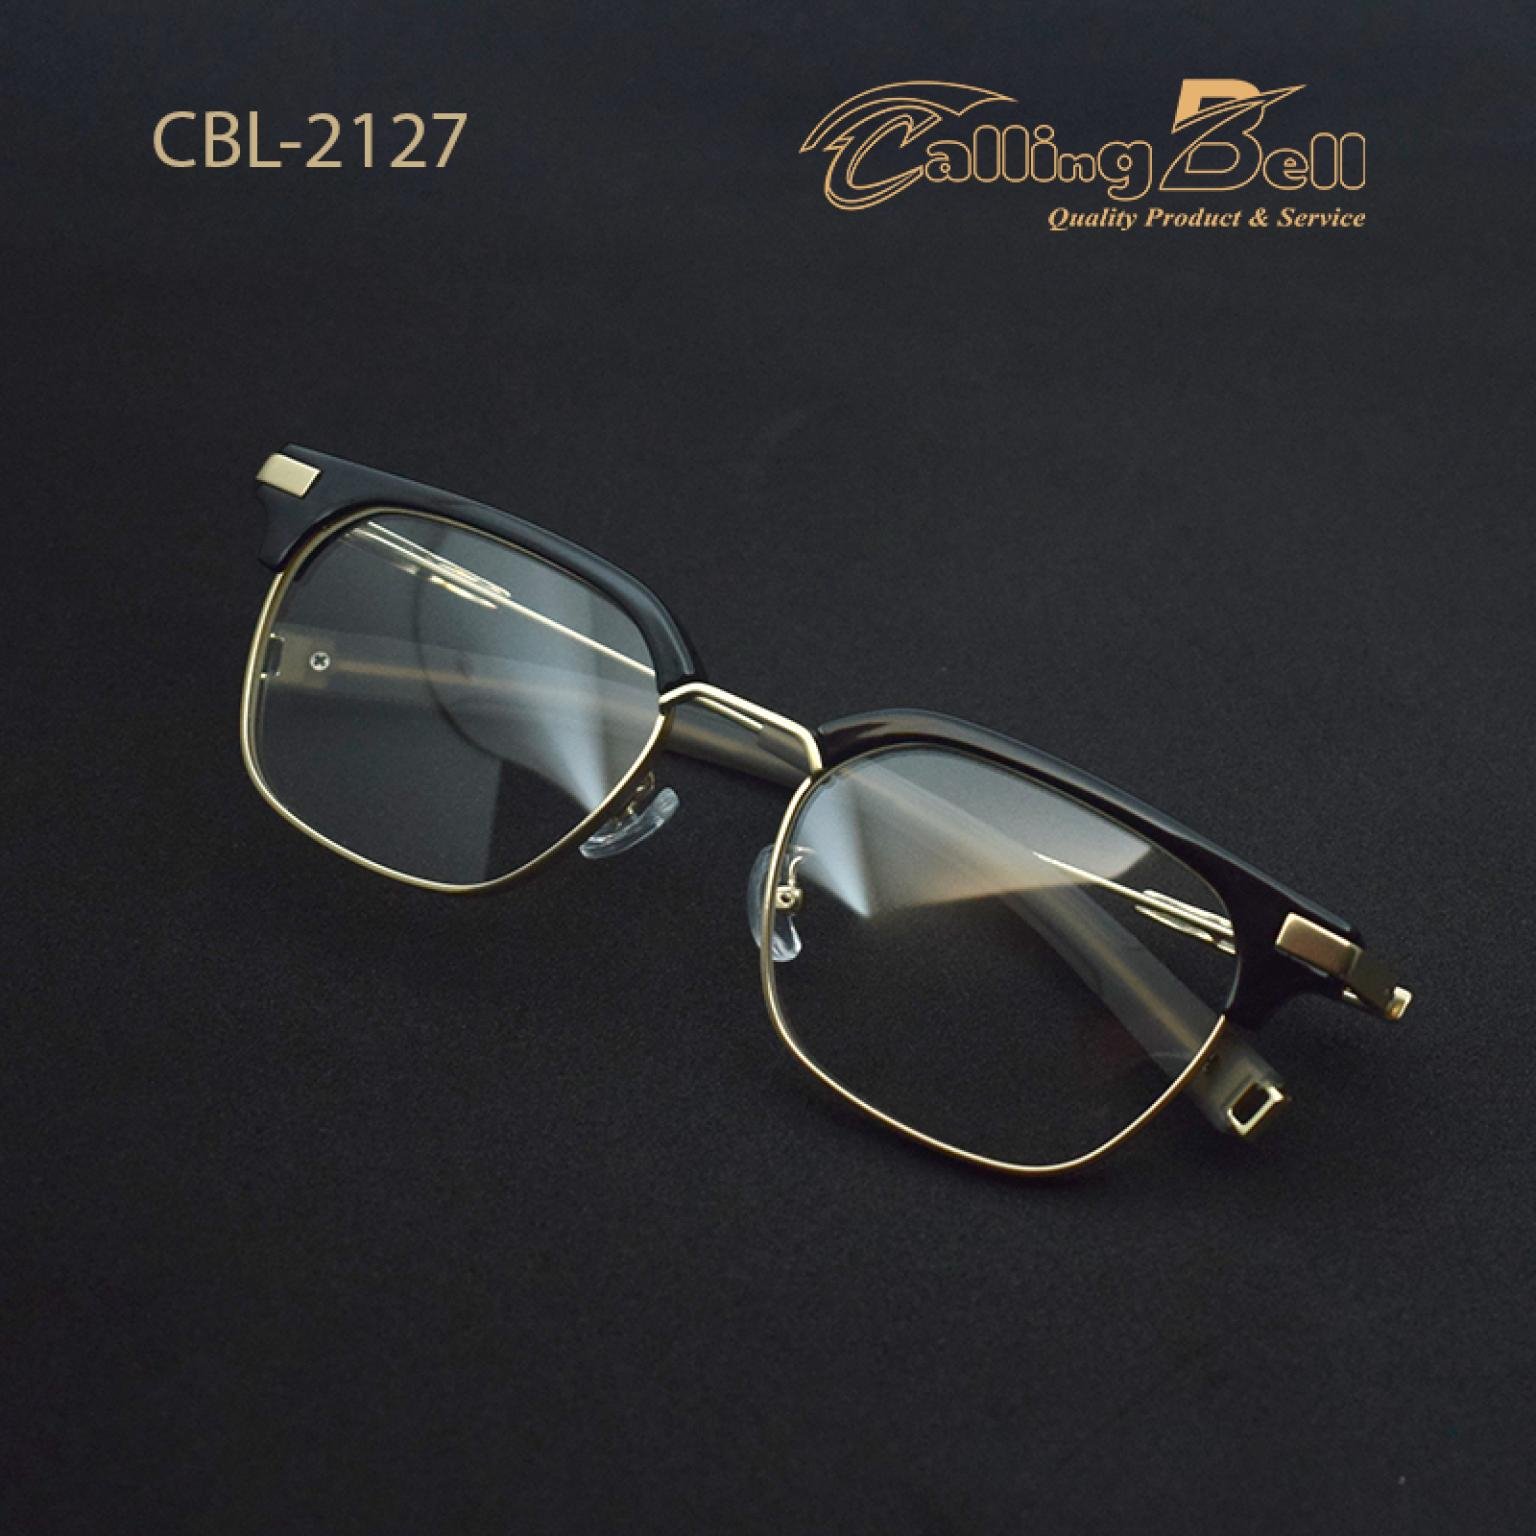 Premium Quality Clubmaster With Classic Look For Men Women Acetate Frame With Metal